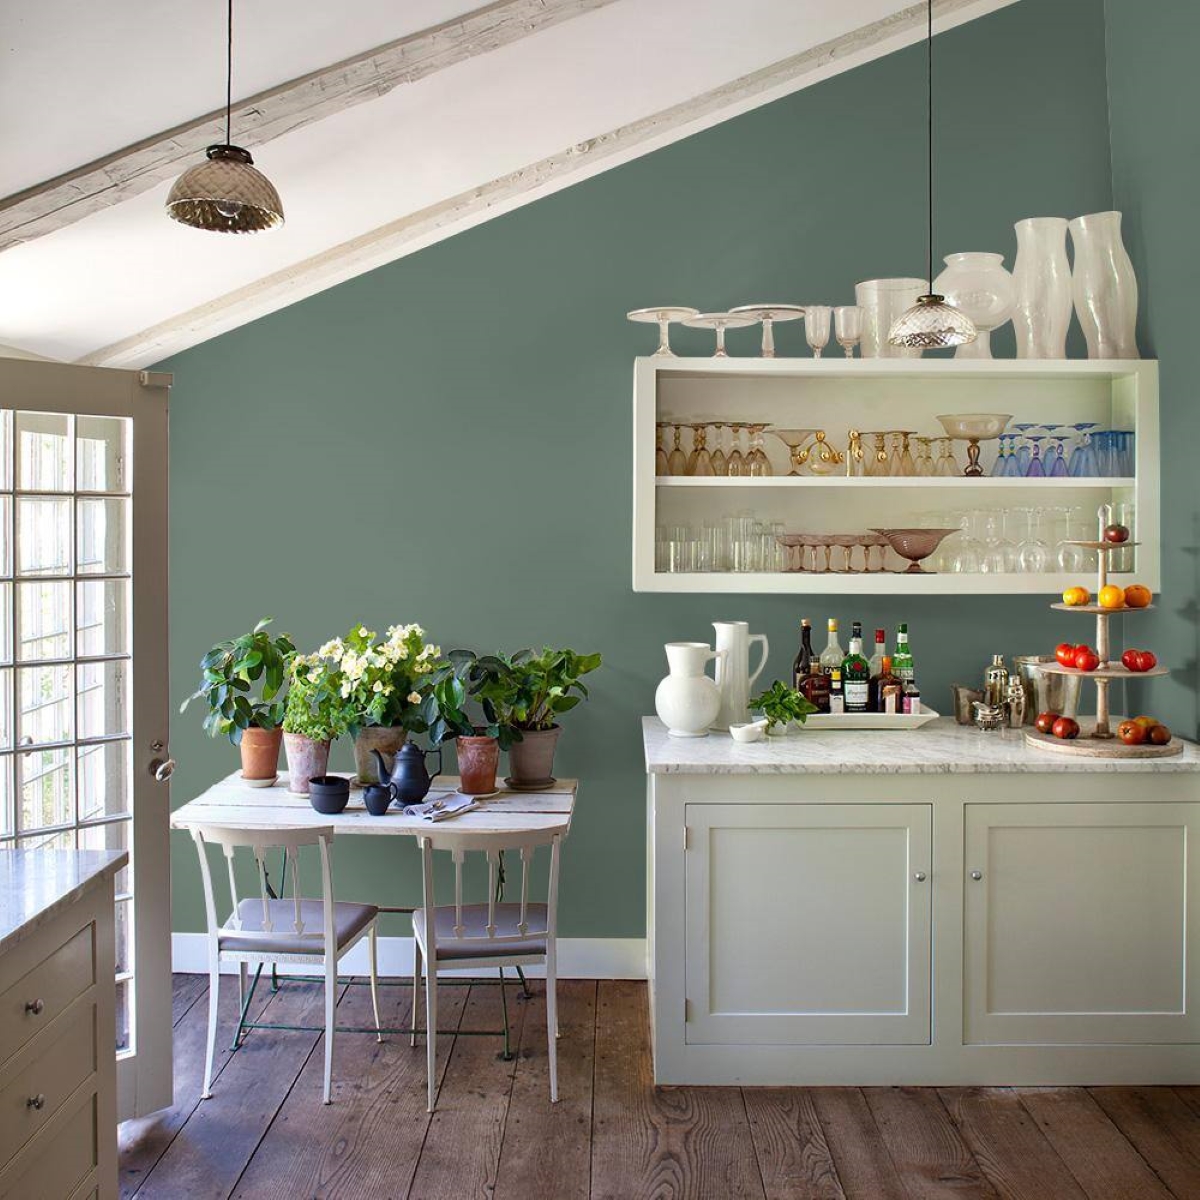 Small kitchen with green wall.